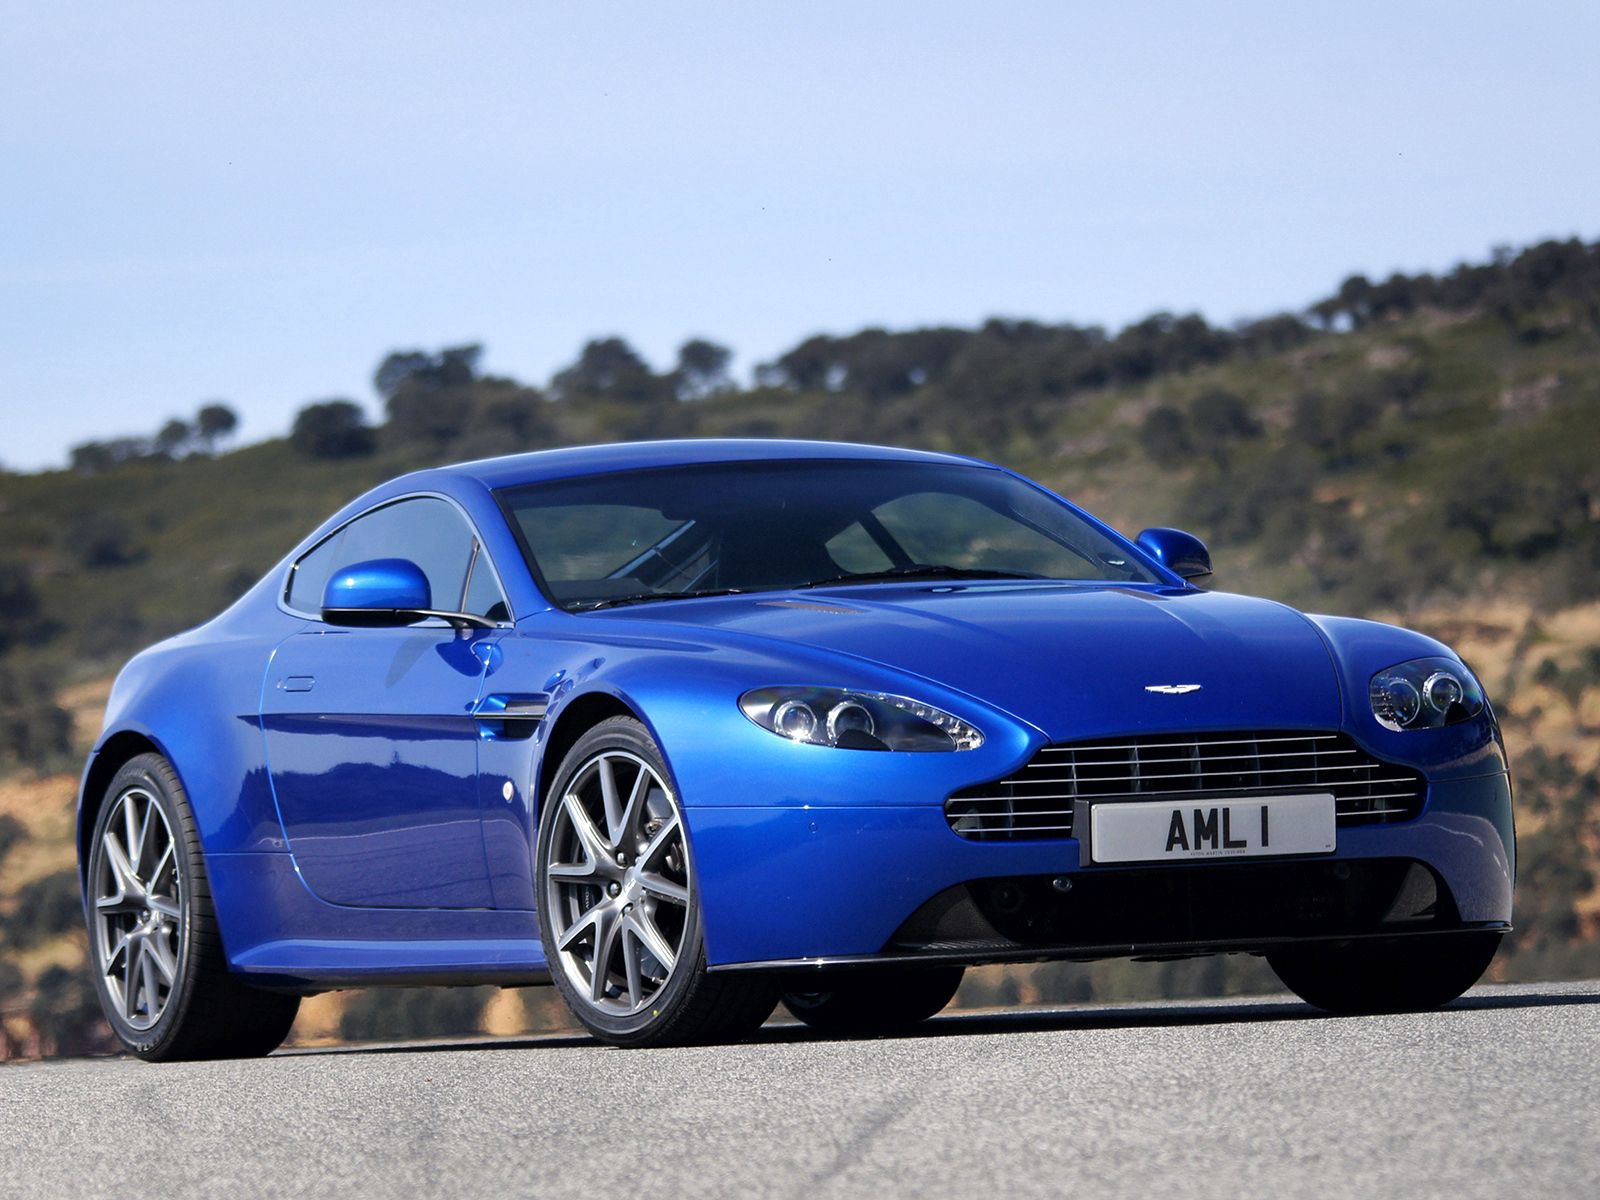 v8, front view, cars, nature, aston martin, blue, style, 2011, vantage for android